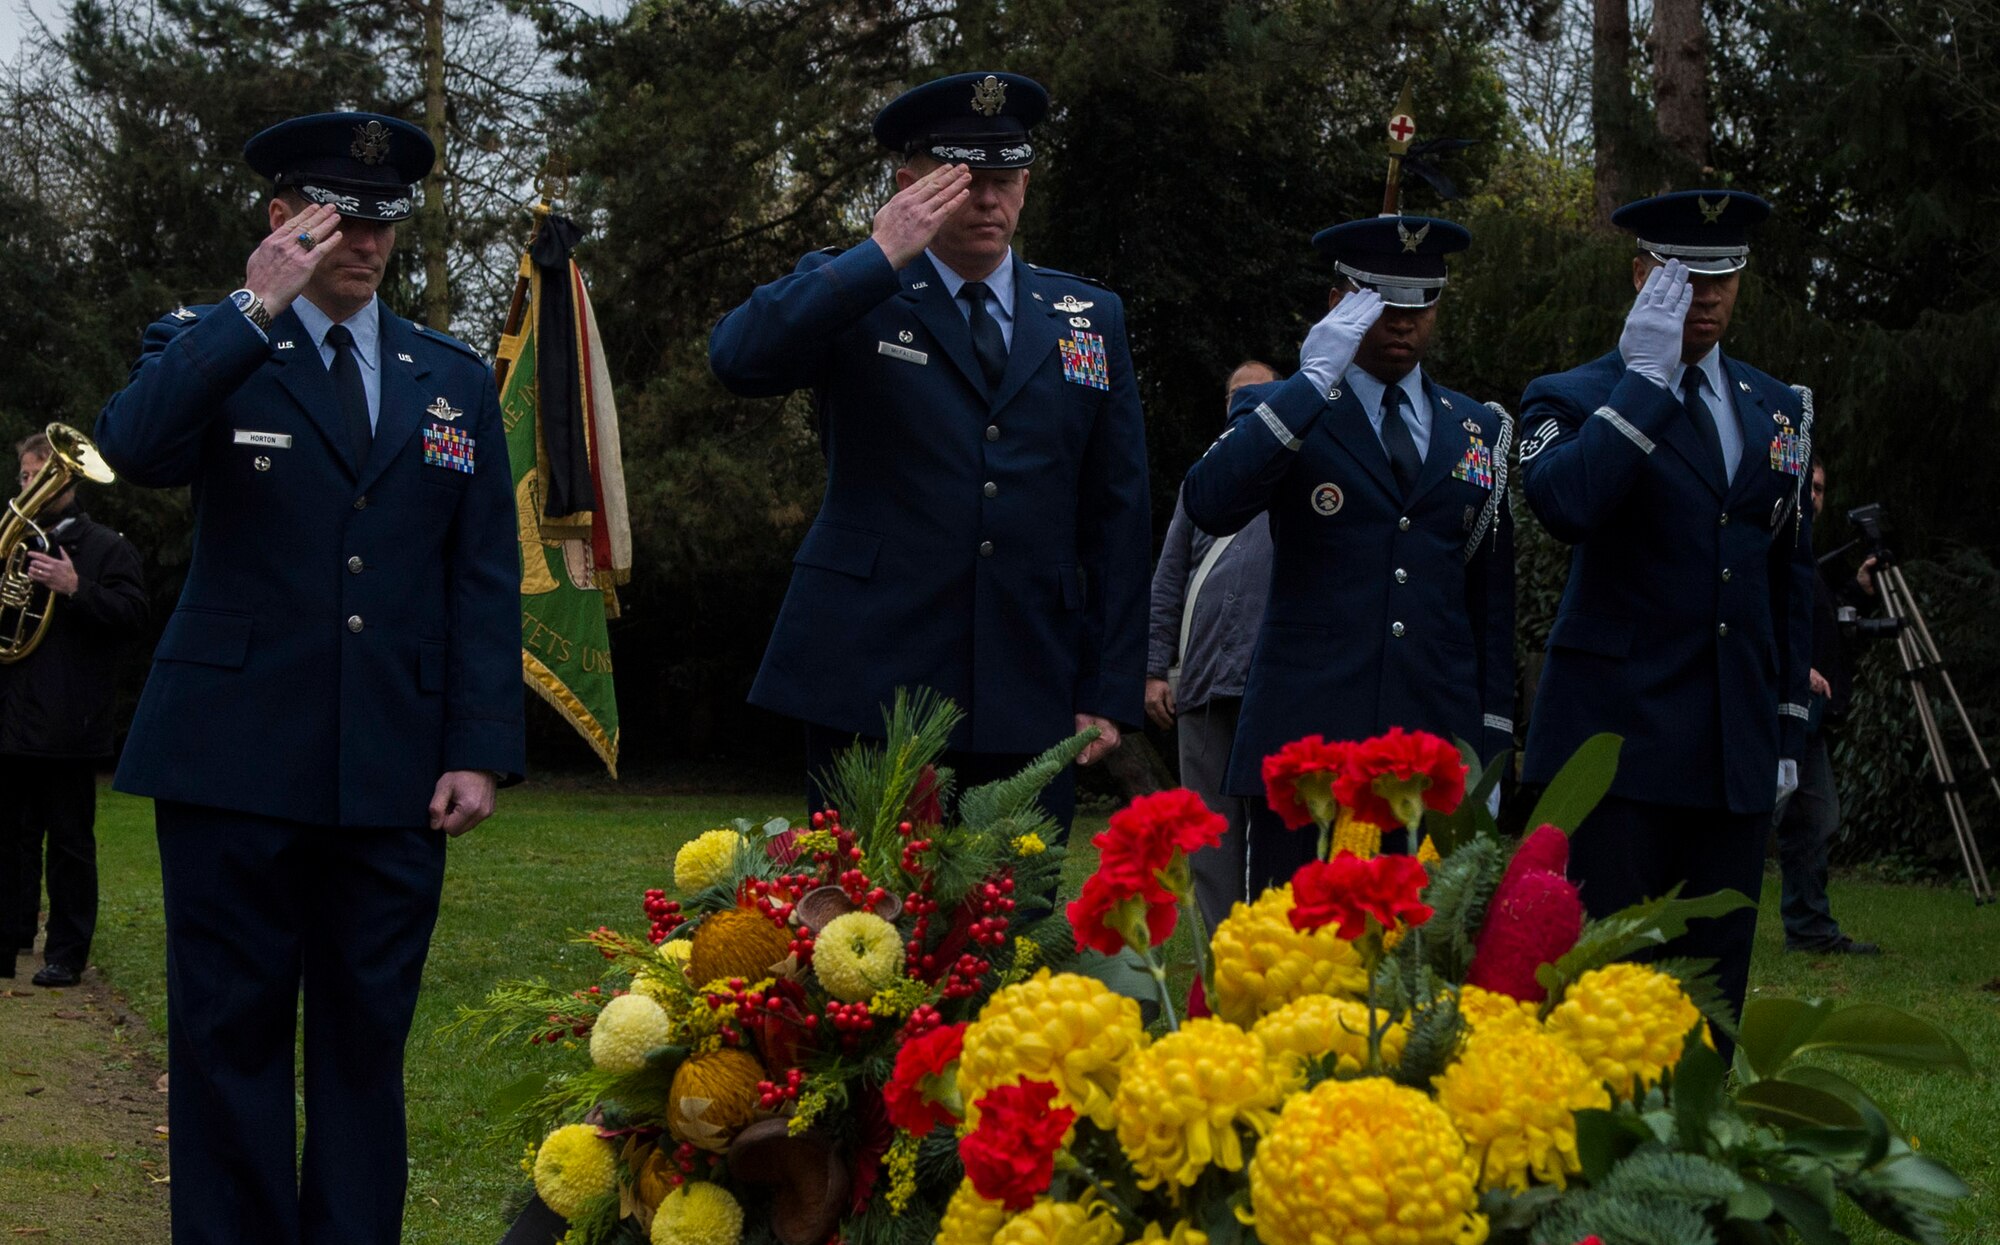 Spangdahlem Airmen salute after laying a wreath during a National Mourning Day ceremony at a cemetery in Trier, Germany, Nov. 15, 2015. Germany’s National Mourning Day is day for mourning the victims of the two world wars, those who lost their lives during current operations, and ones still missing in action. (U.S. Air Force photo by Airman 1st Class Luke Kitterman/Released)